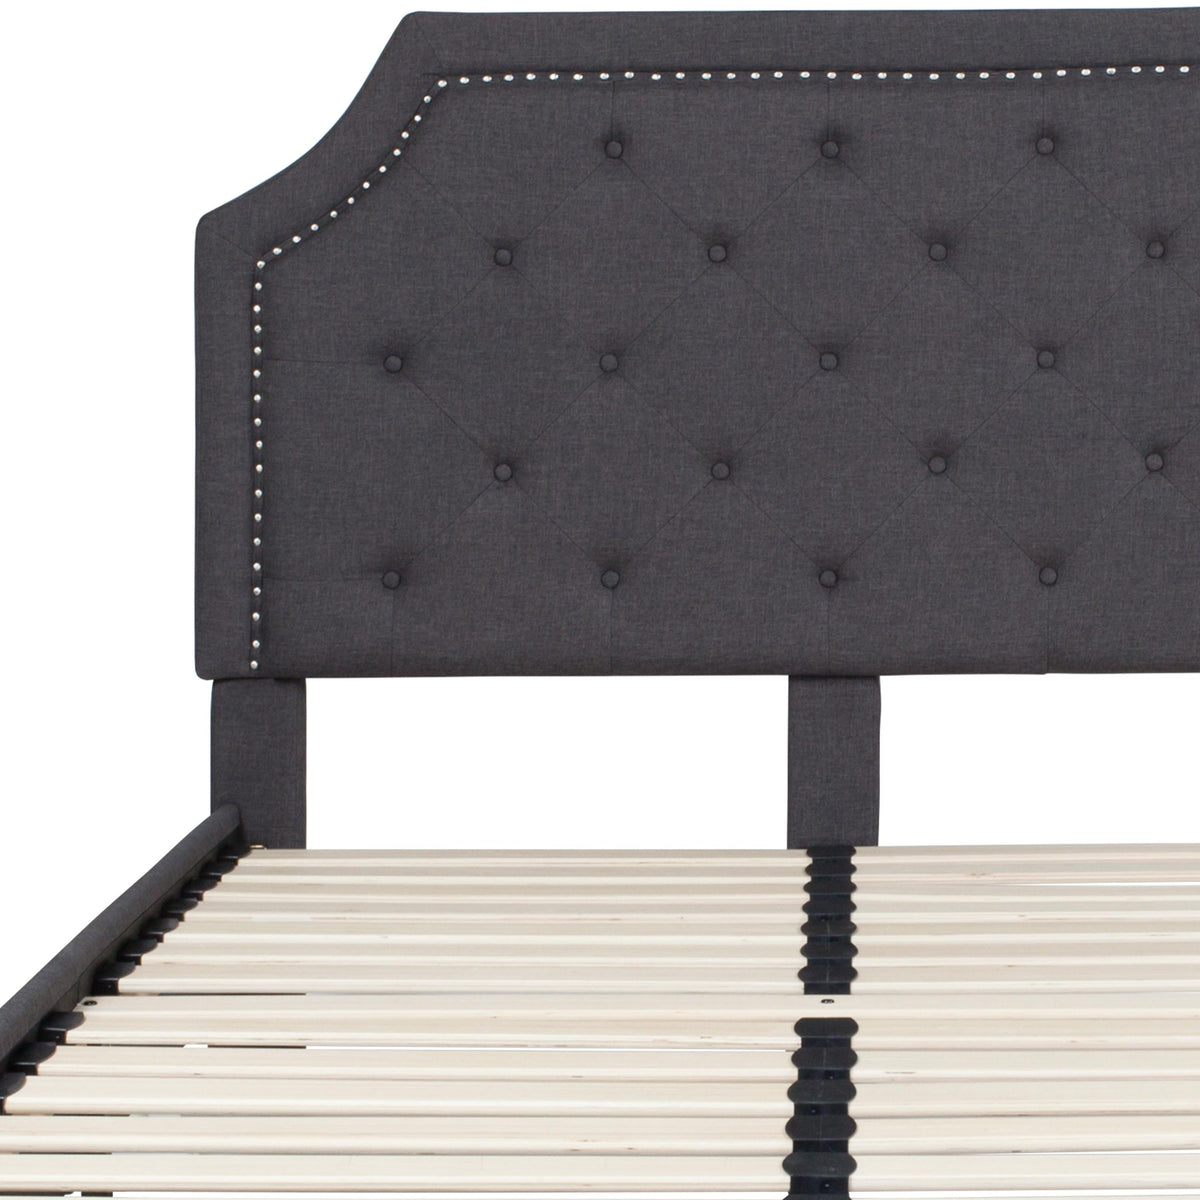 Dark Gray,Full |#| Full Size Arched Tufted Upholstered Platform Bed in Dark Gray Fabric